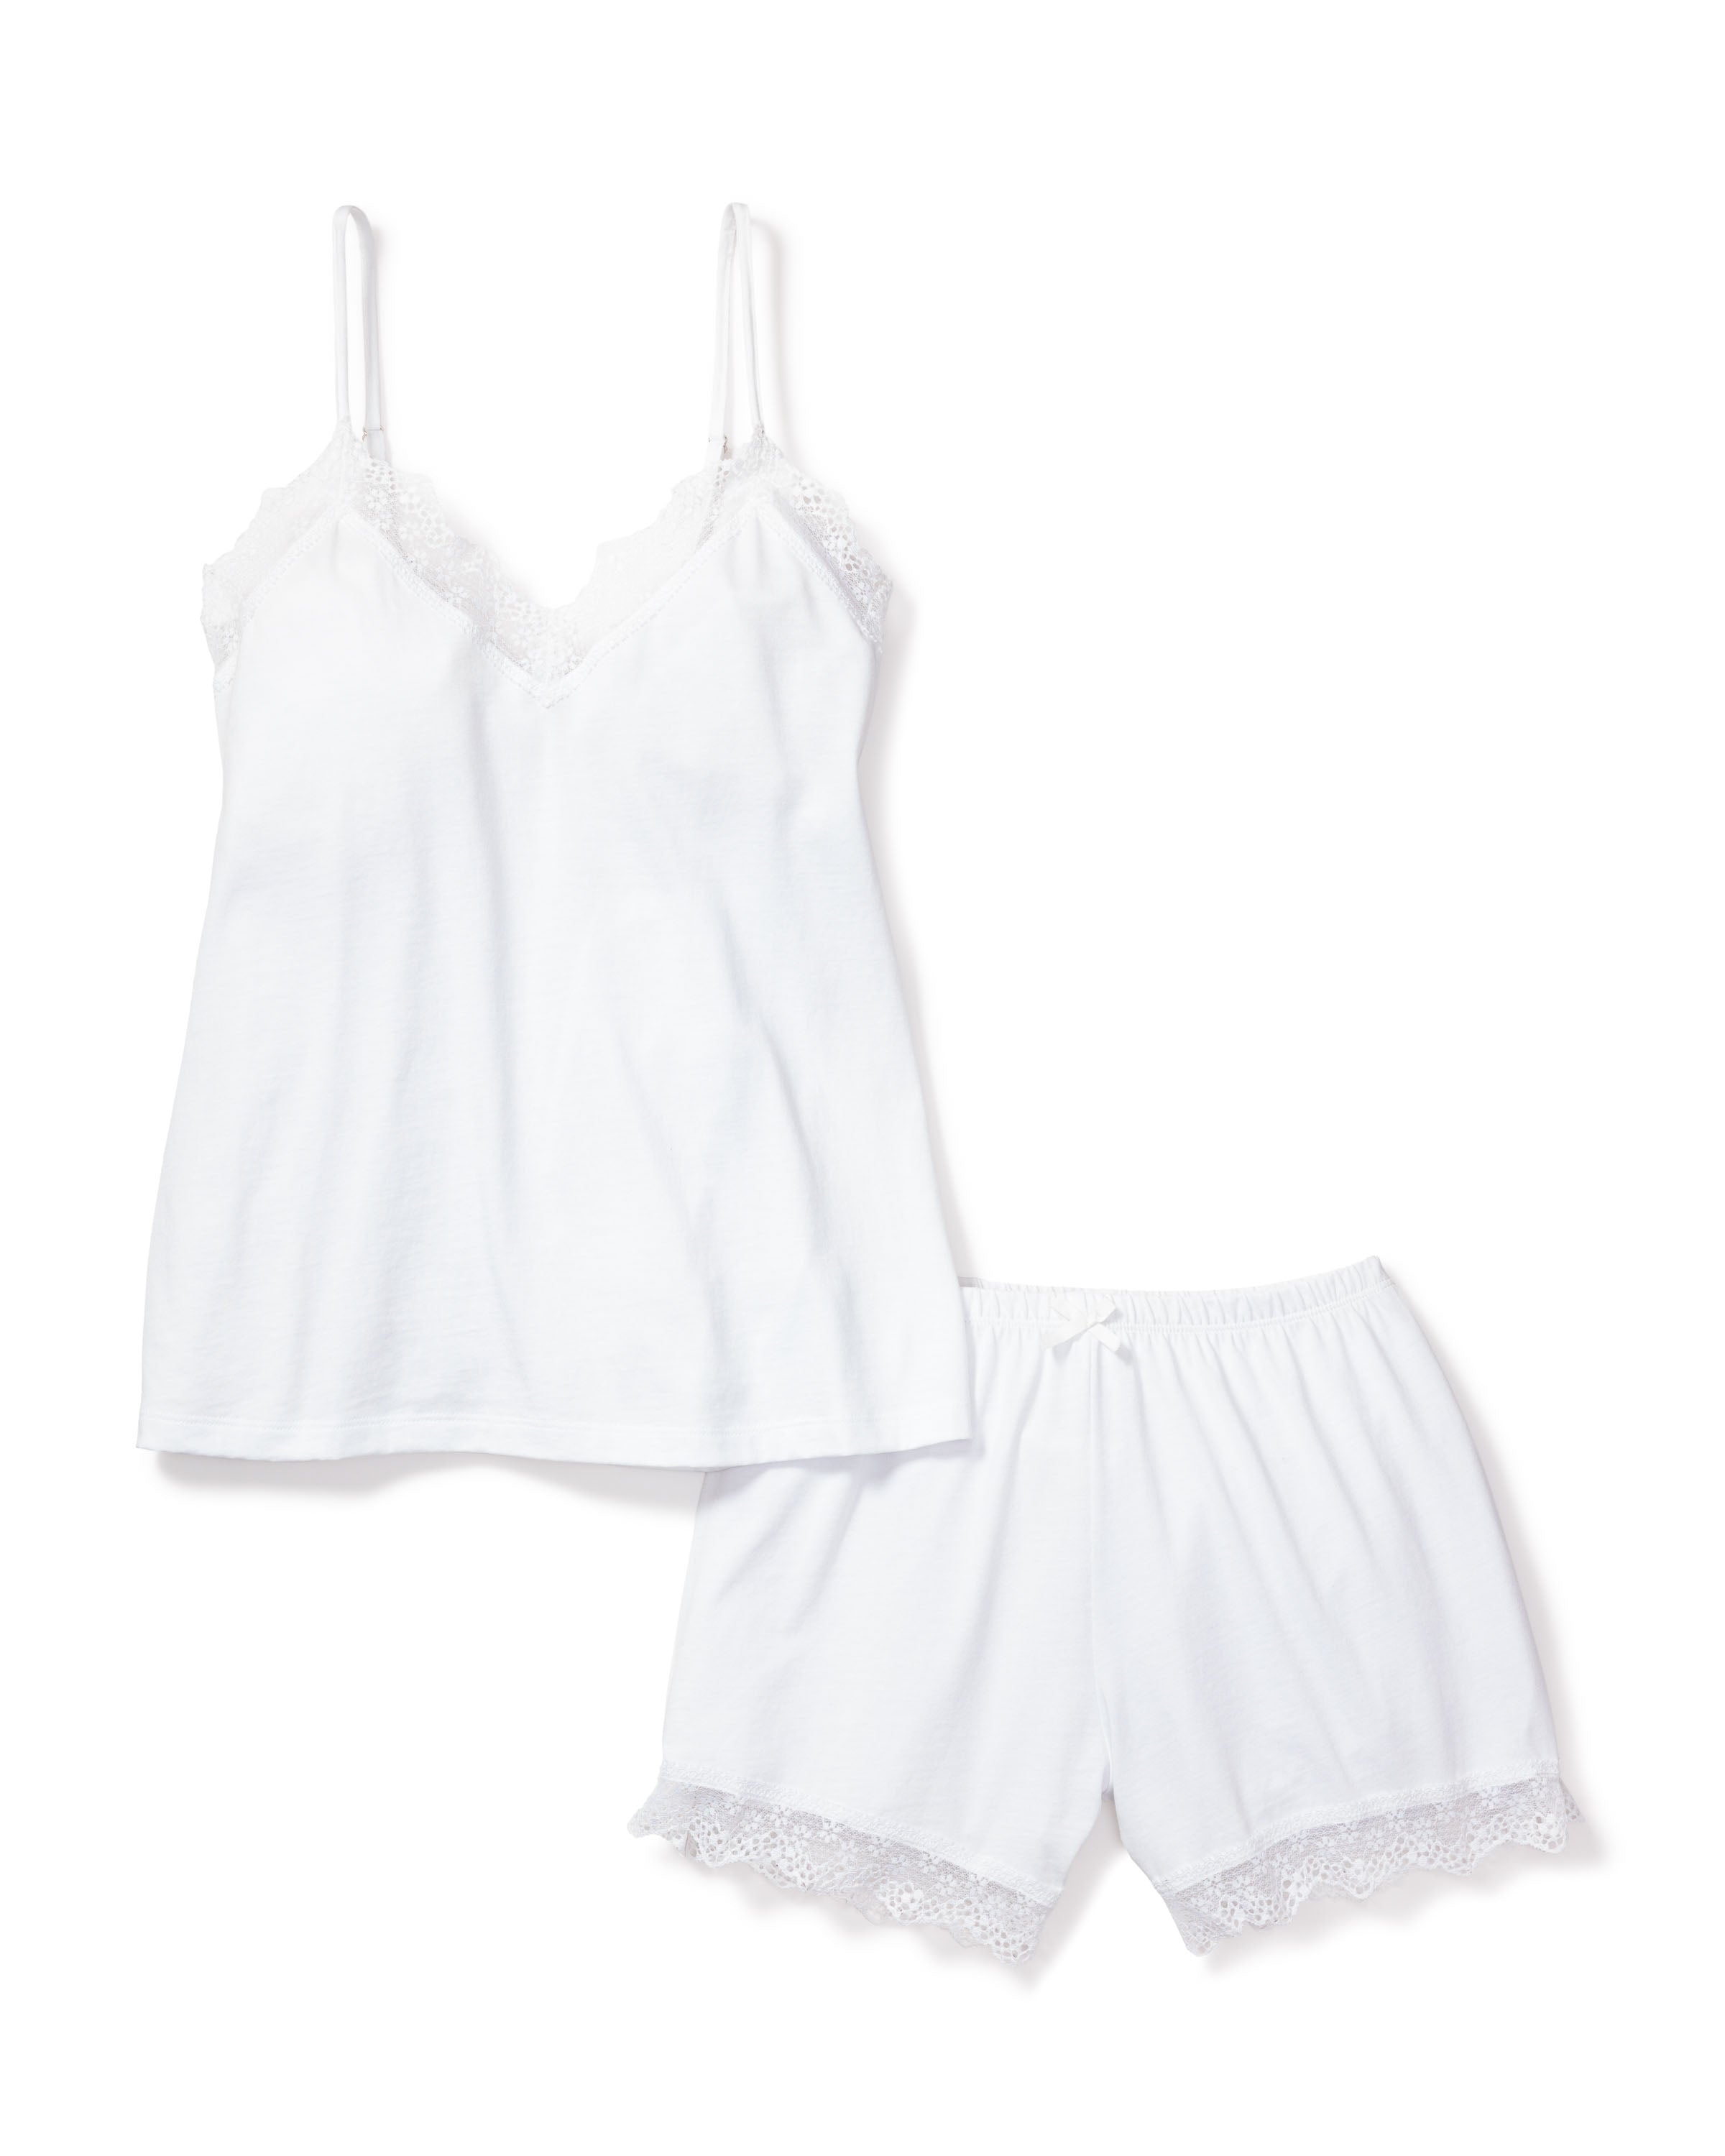 Women's Pima Cami Short Set with Lace in White